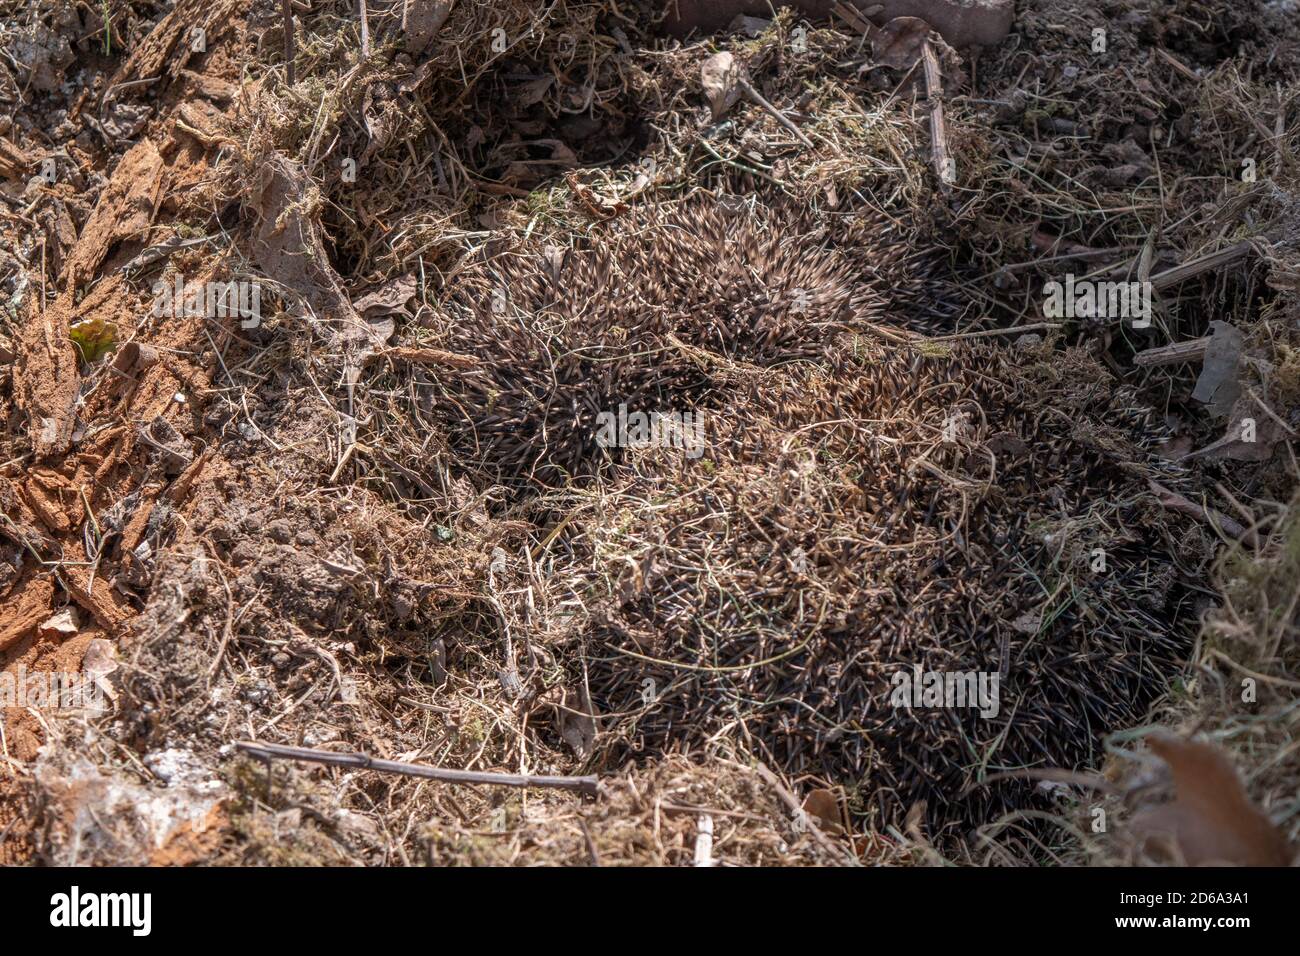 Three one adult and two baby hedgehogs asleep in their nest camouflaged against dried grasses found after removal of an old shed. Stock Photo